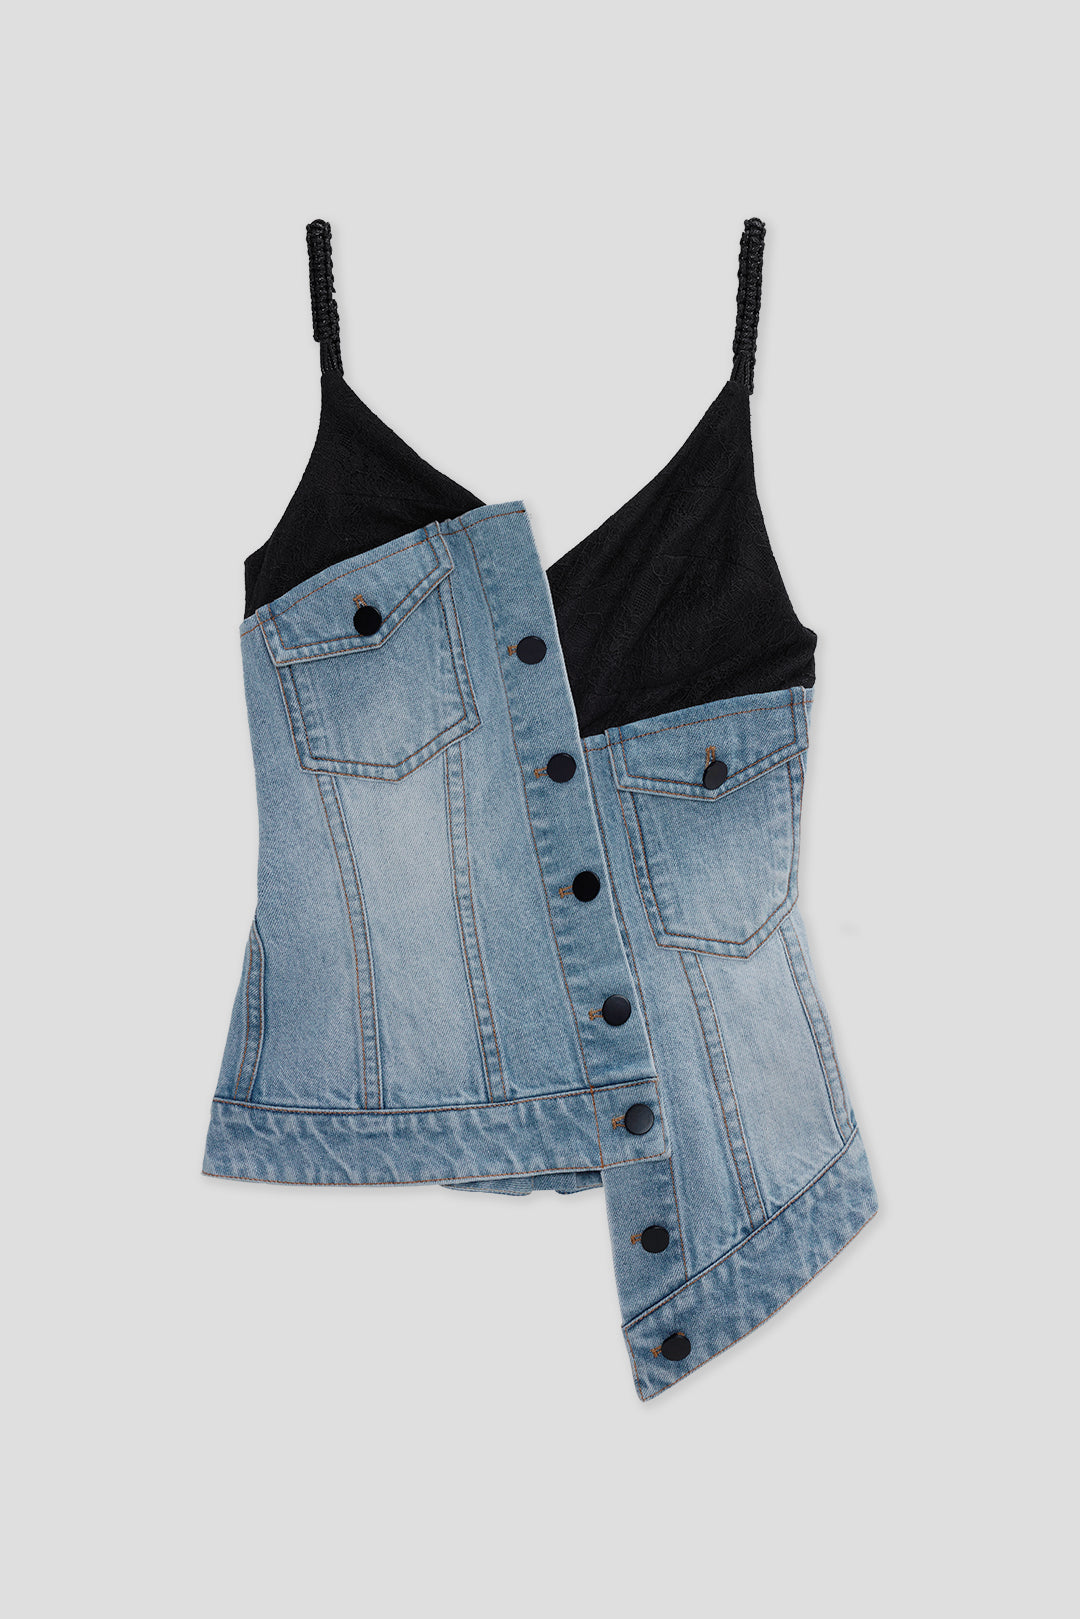 Misplaced Lace and Denim Top